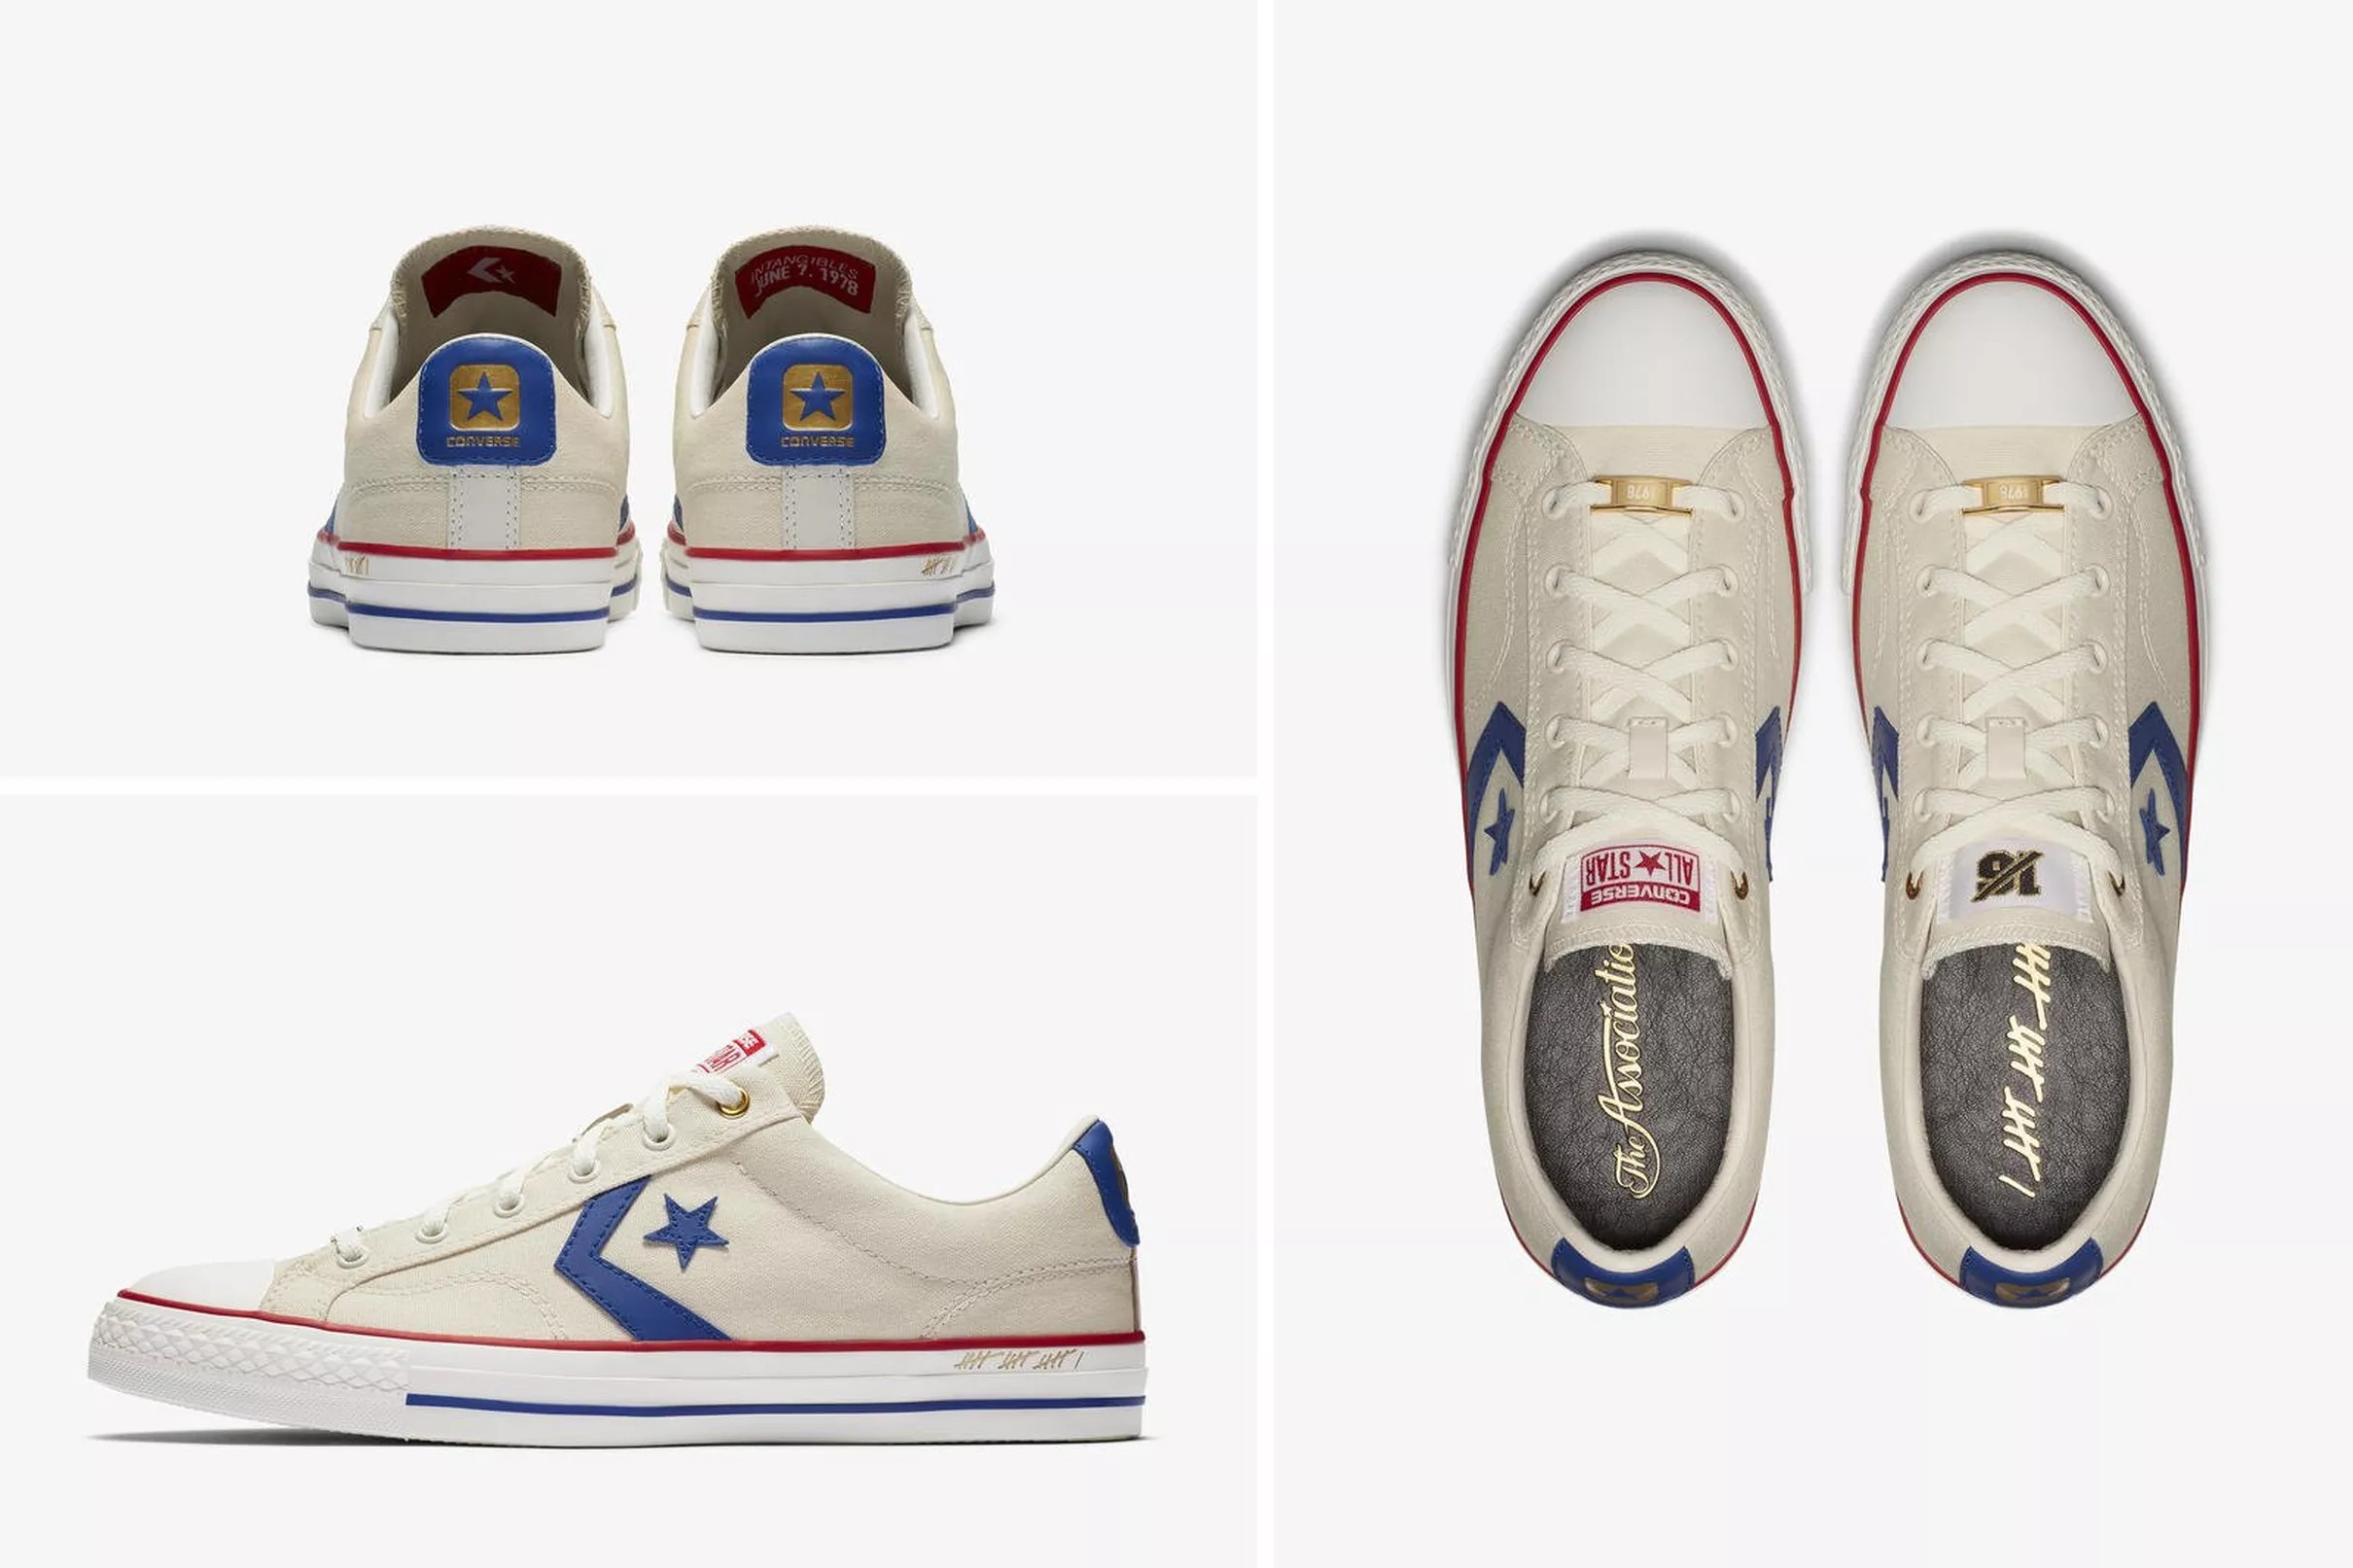 Nike and Converse honoring Wes Unseld’s 1978 NBA Finals performance